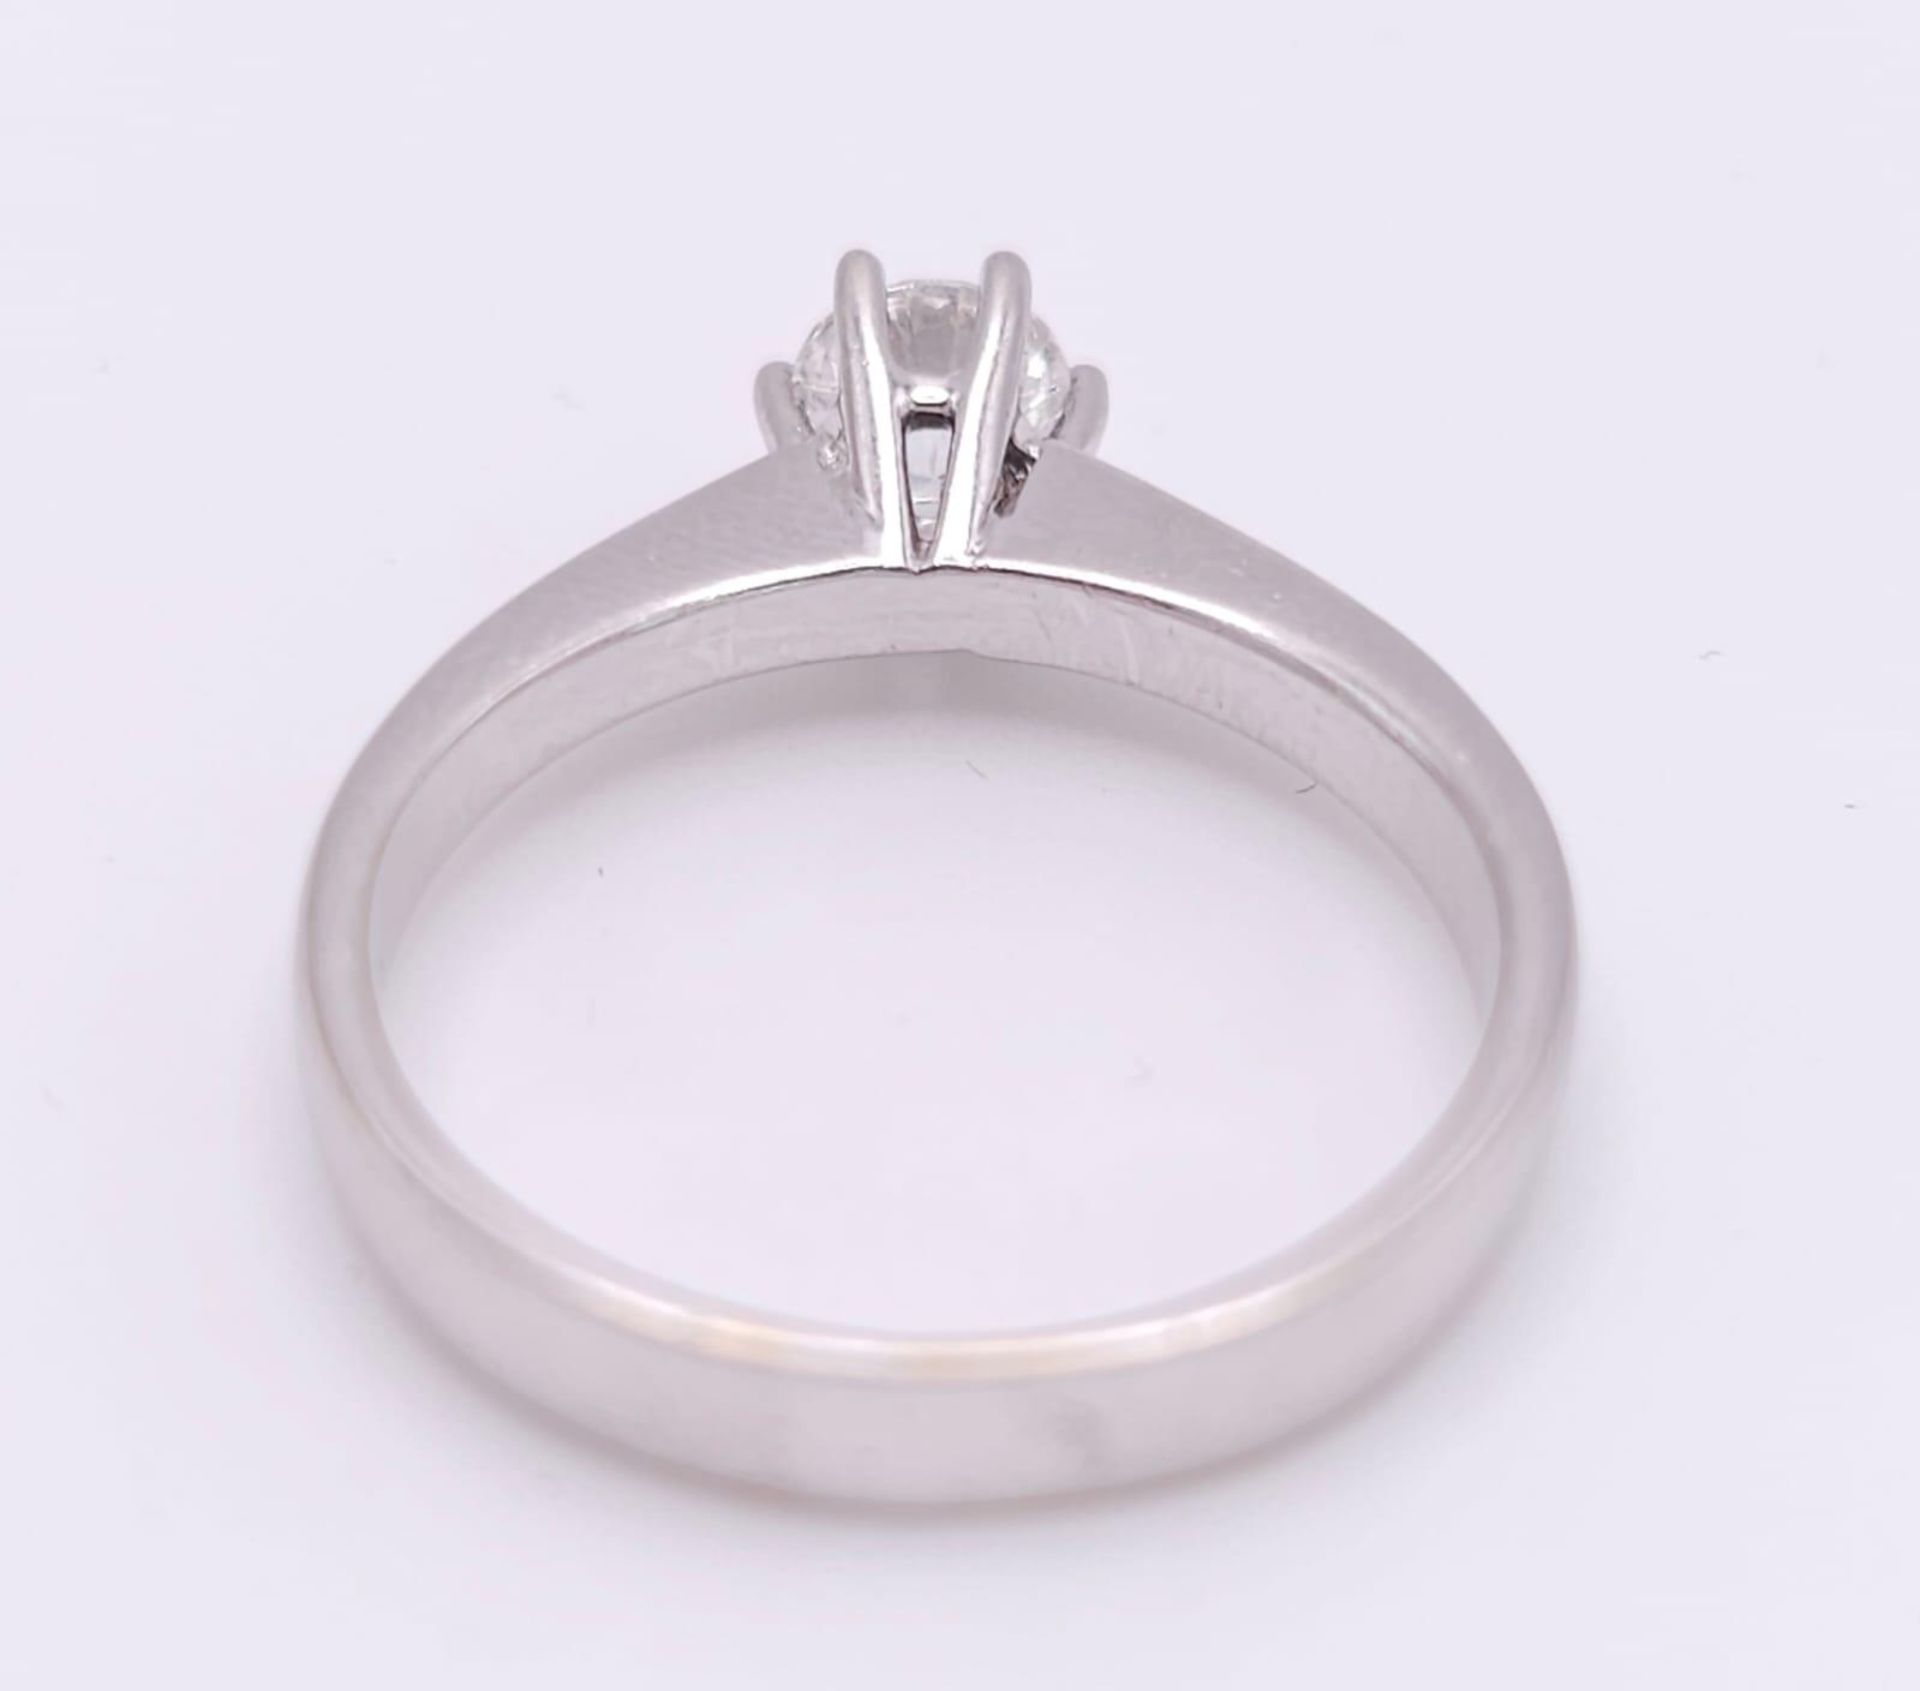 AN 18K WHITE GOLD DIAMOND SOLITAIRE RING - 0.50CT. 6 CLAW SETTING. 3.9G. SIZE N - Bild 4 aus 7